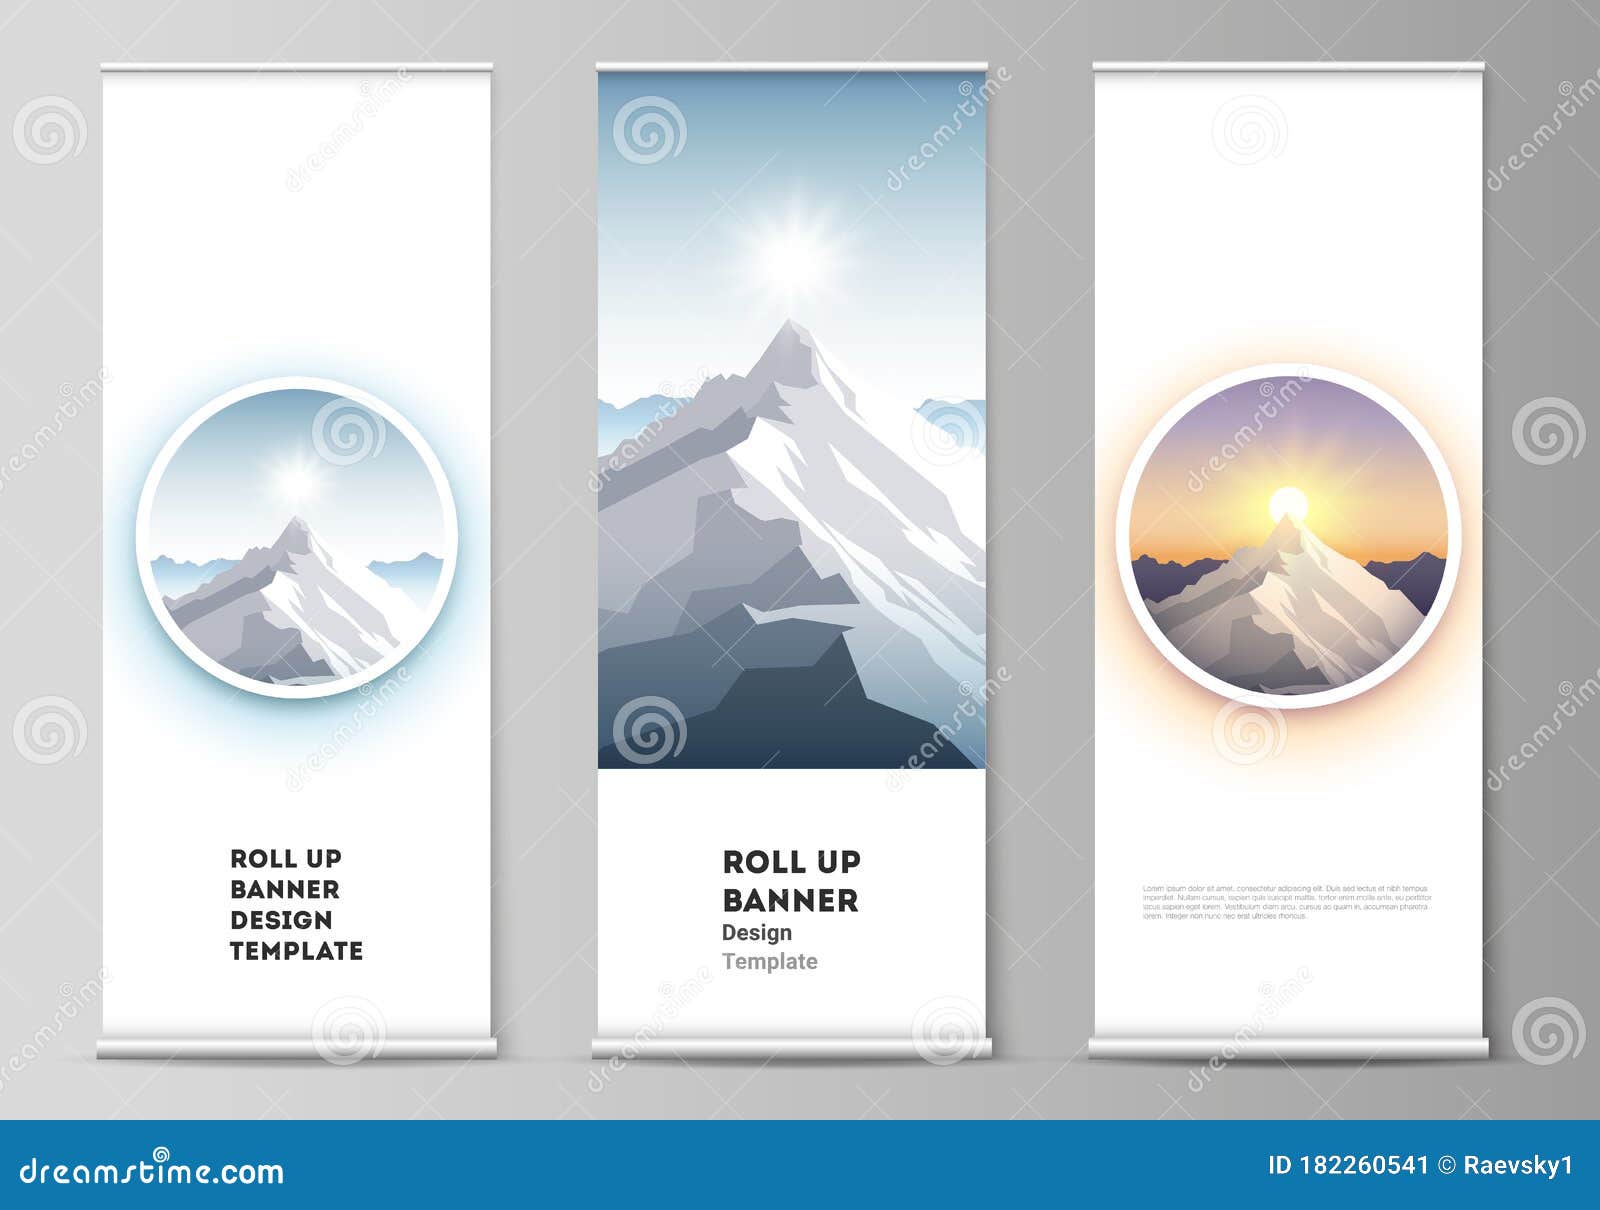 The Vector Illustration Layout of Roll Up Banner Stands, Vertical Regarding Outdoor Banner Design Templates